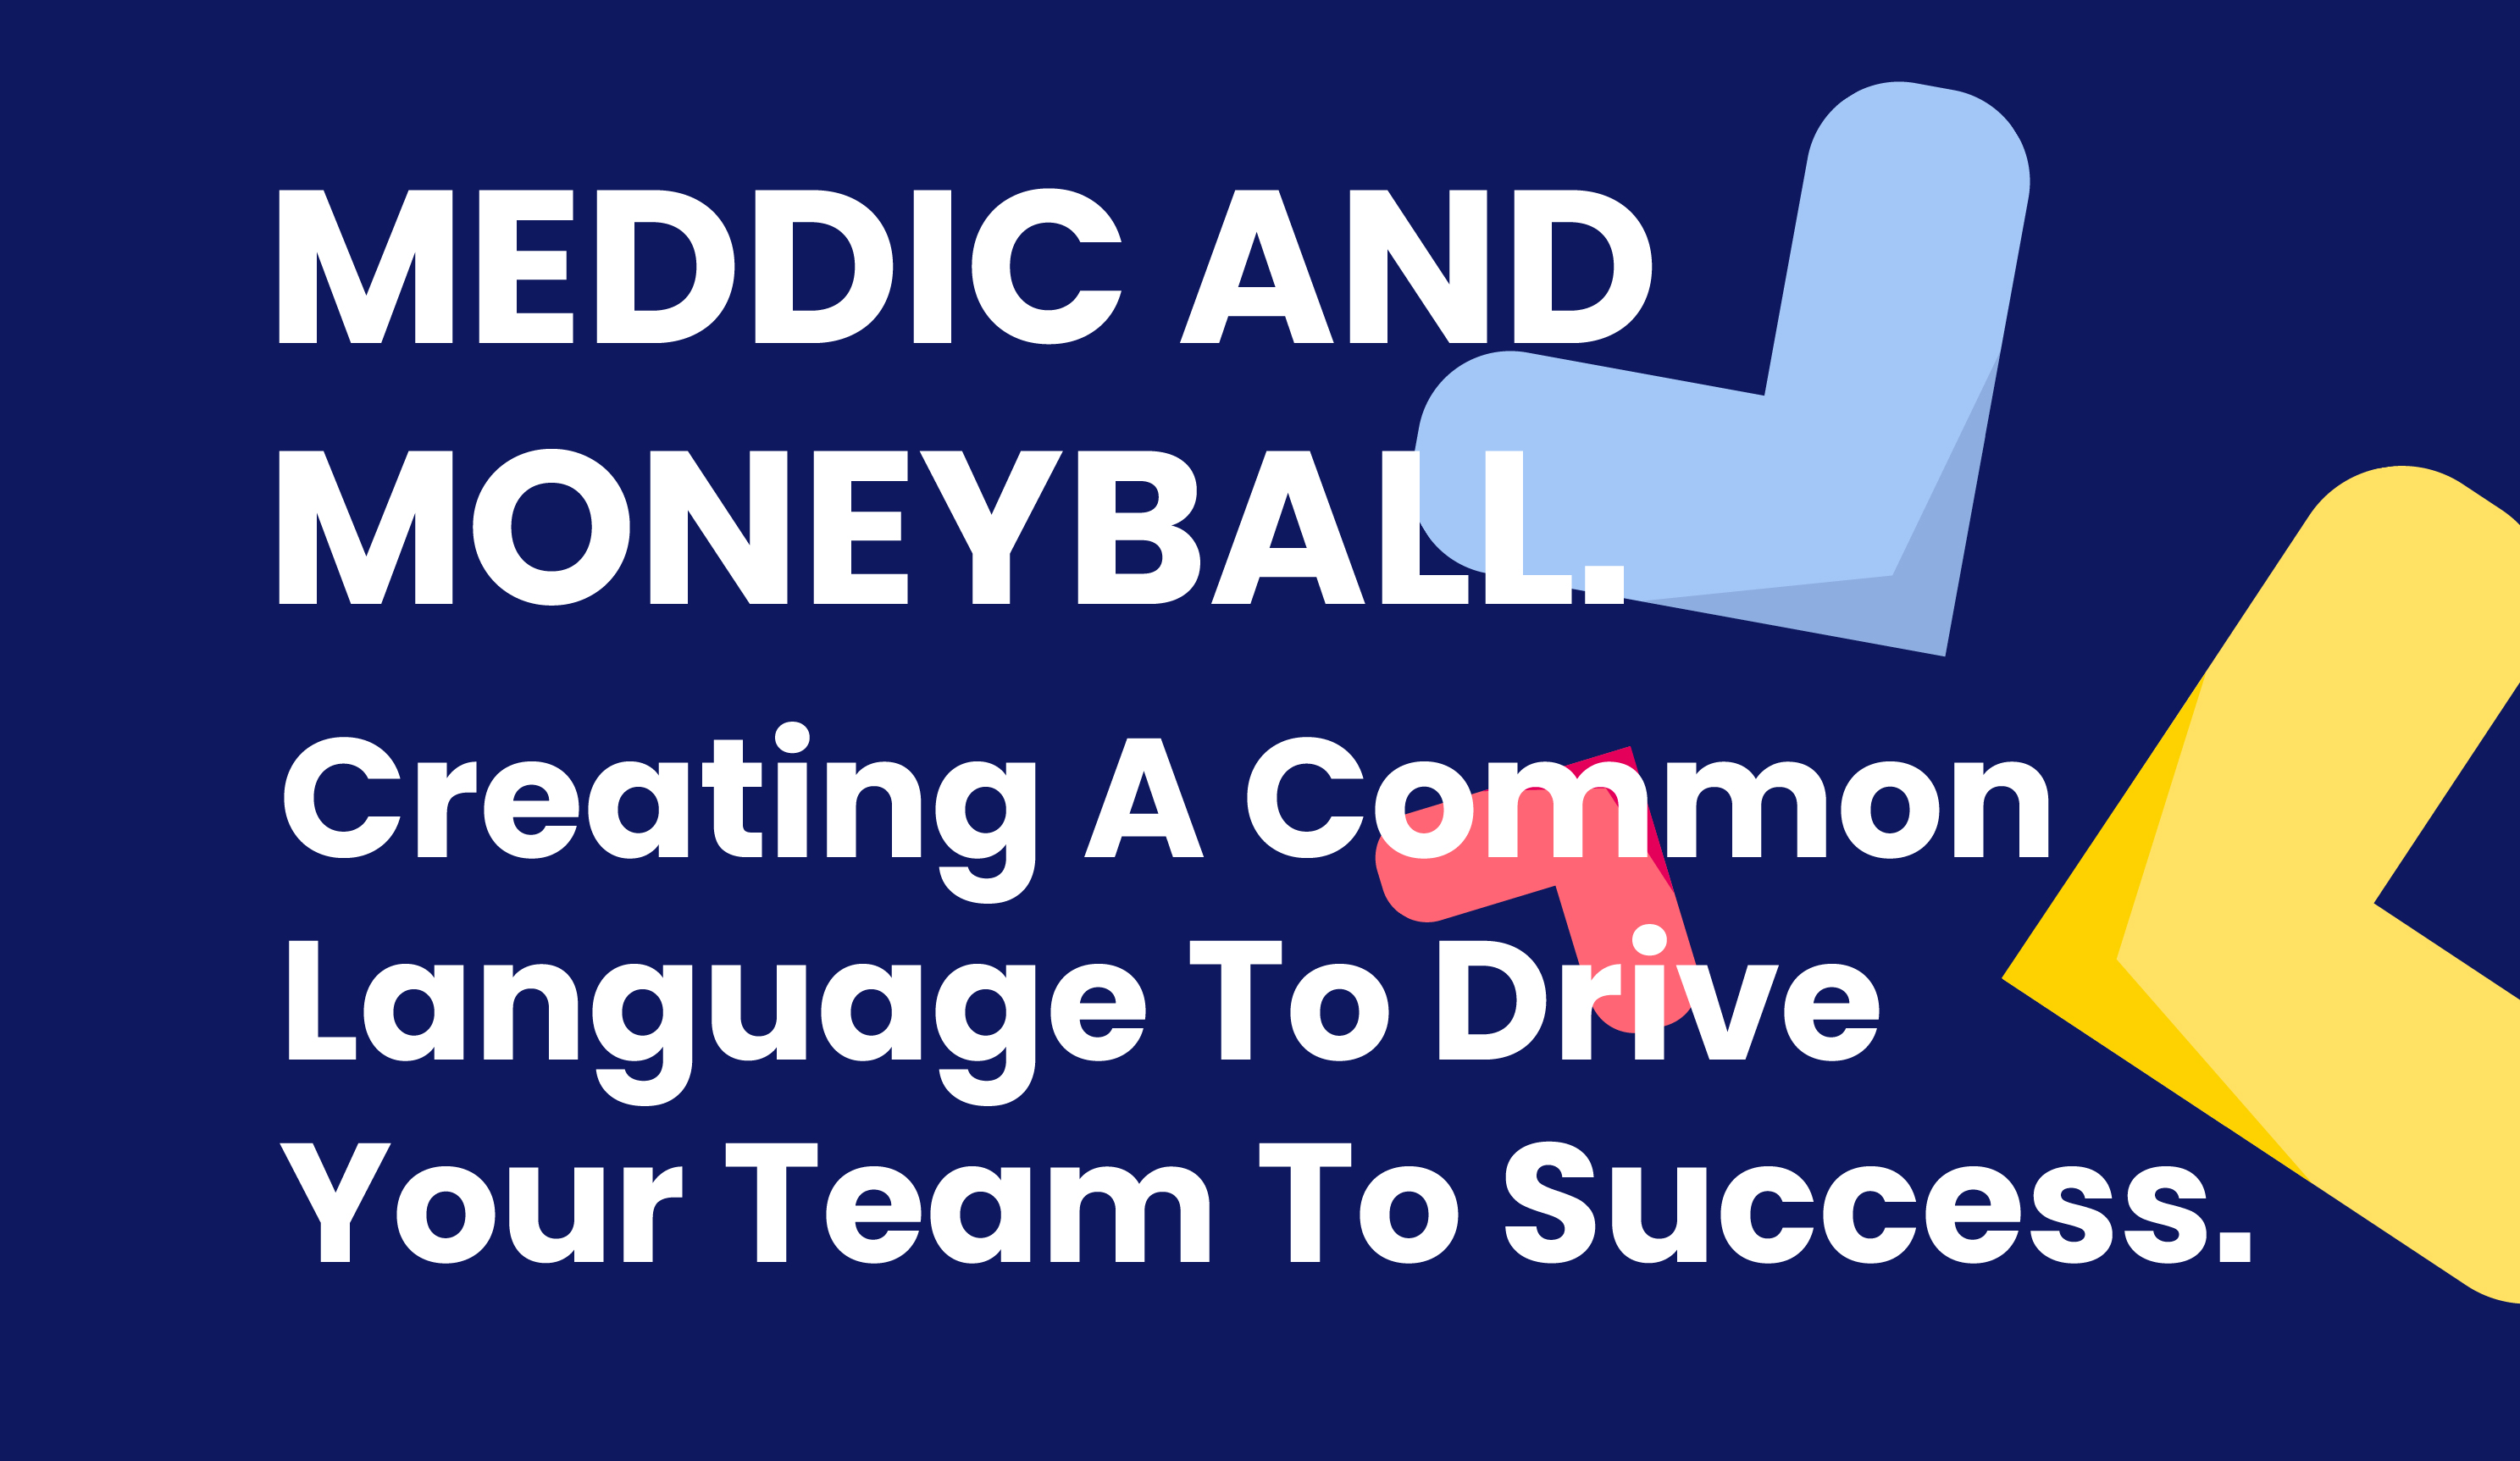 MEDDIC & Moneyball #2: Creating a Common Language To Drive Your Team to Success